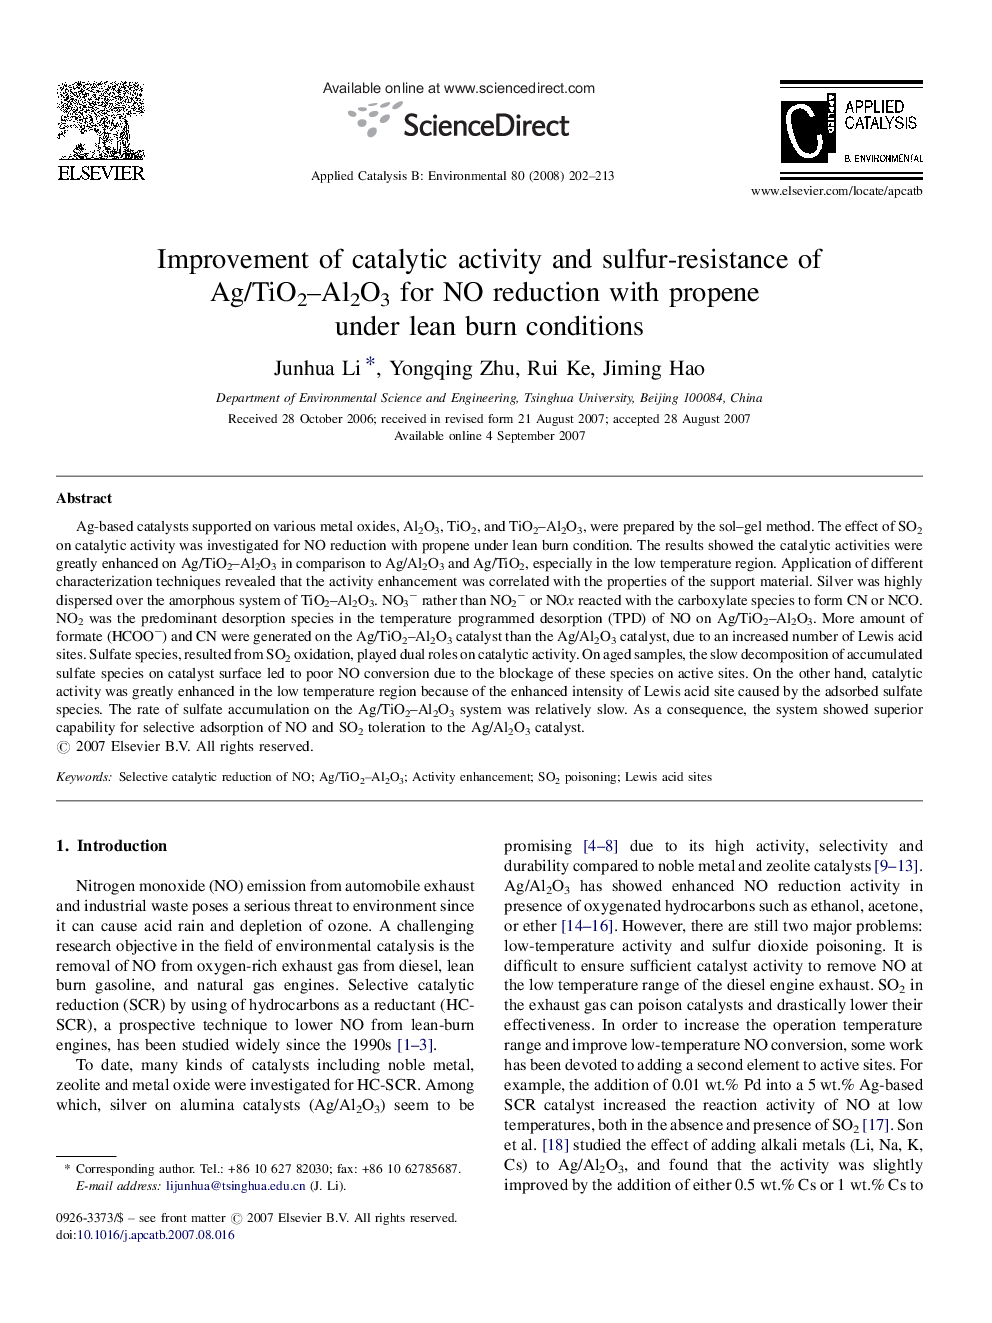 Improvement of catalytic activity and sulfur-resistance of Ag/TiO2–Al2O3 for NO reduction with propene under lean burn conditions